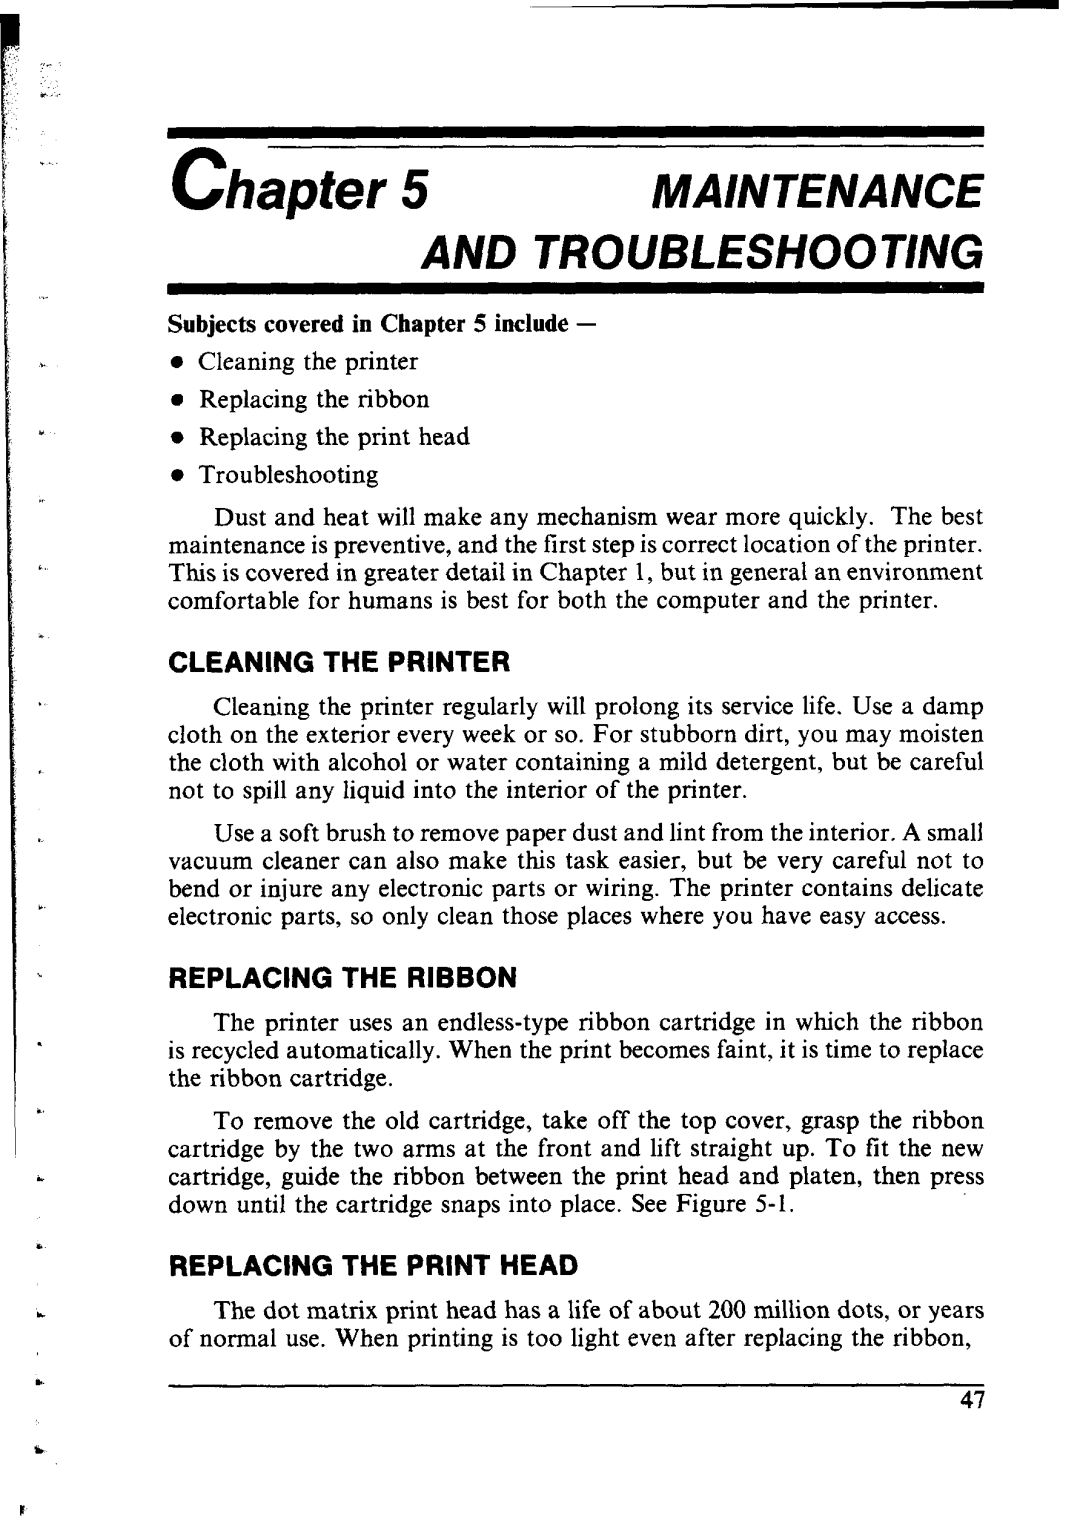 Star Micronics NX-1000 manual Mainteivance, AND TROU8LESHOOTING, Chapter, Cleaning The Printer, Replacing The Ribbon 